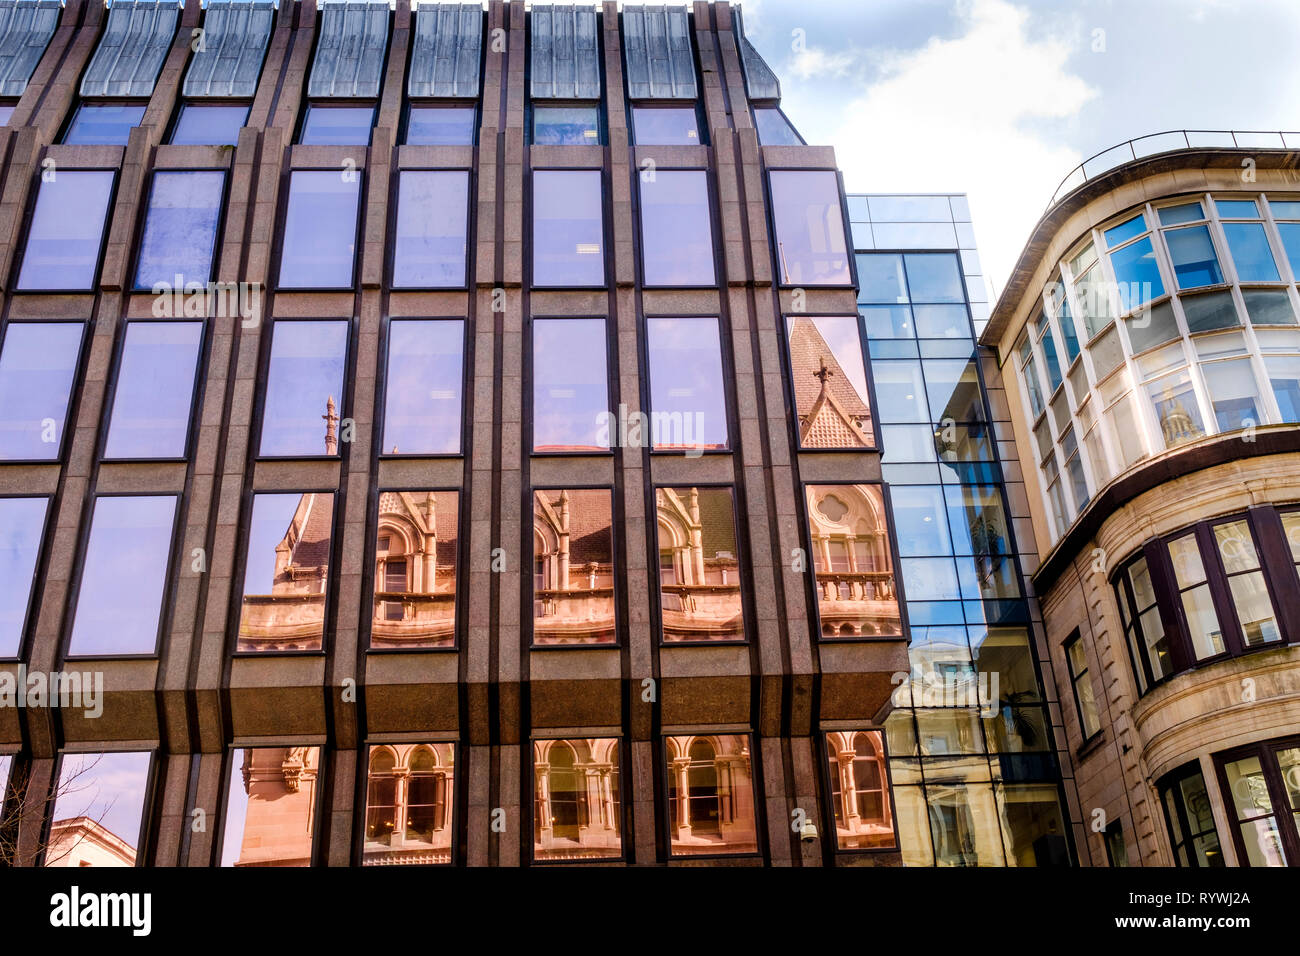 Old buildings refected in the glass frontage of a modern office block in Buchanan Street, Glasgow, Scotland Stock Photo